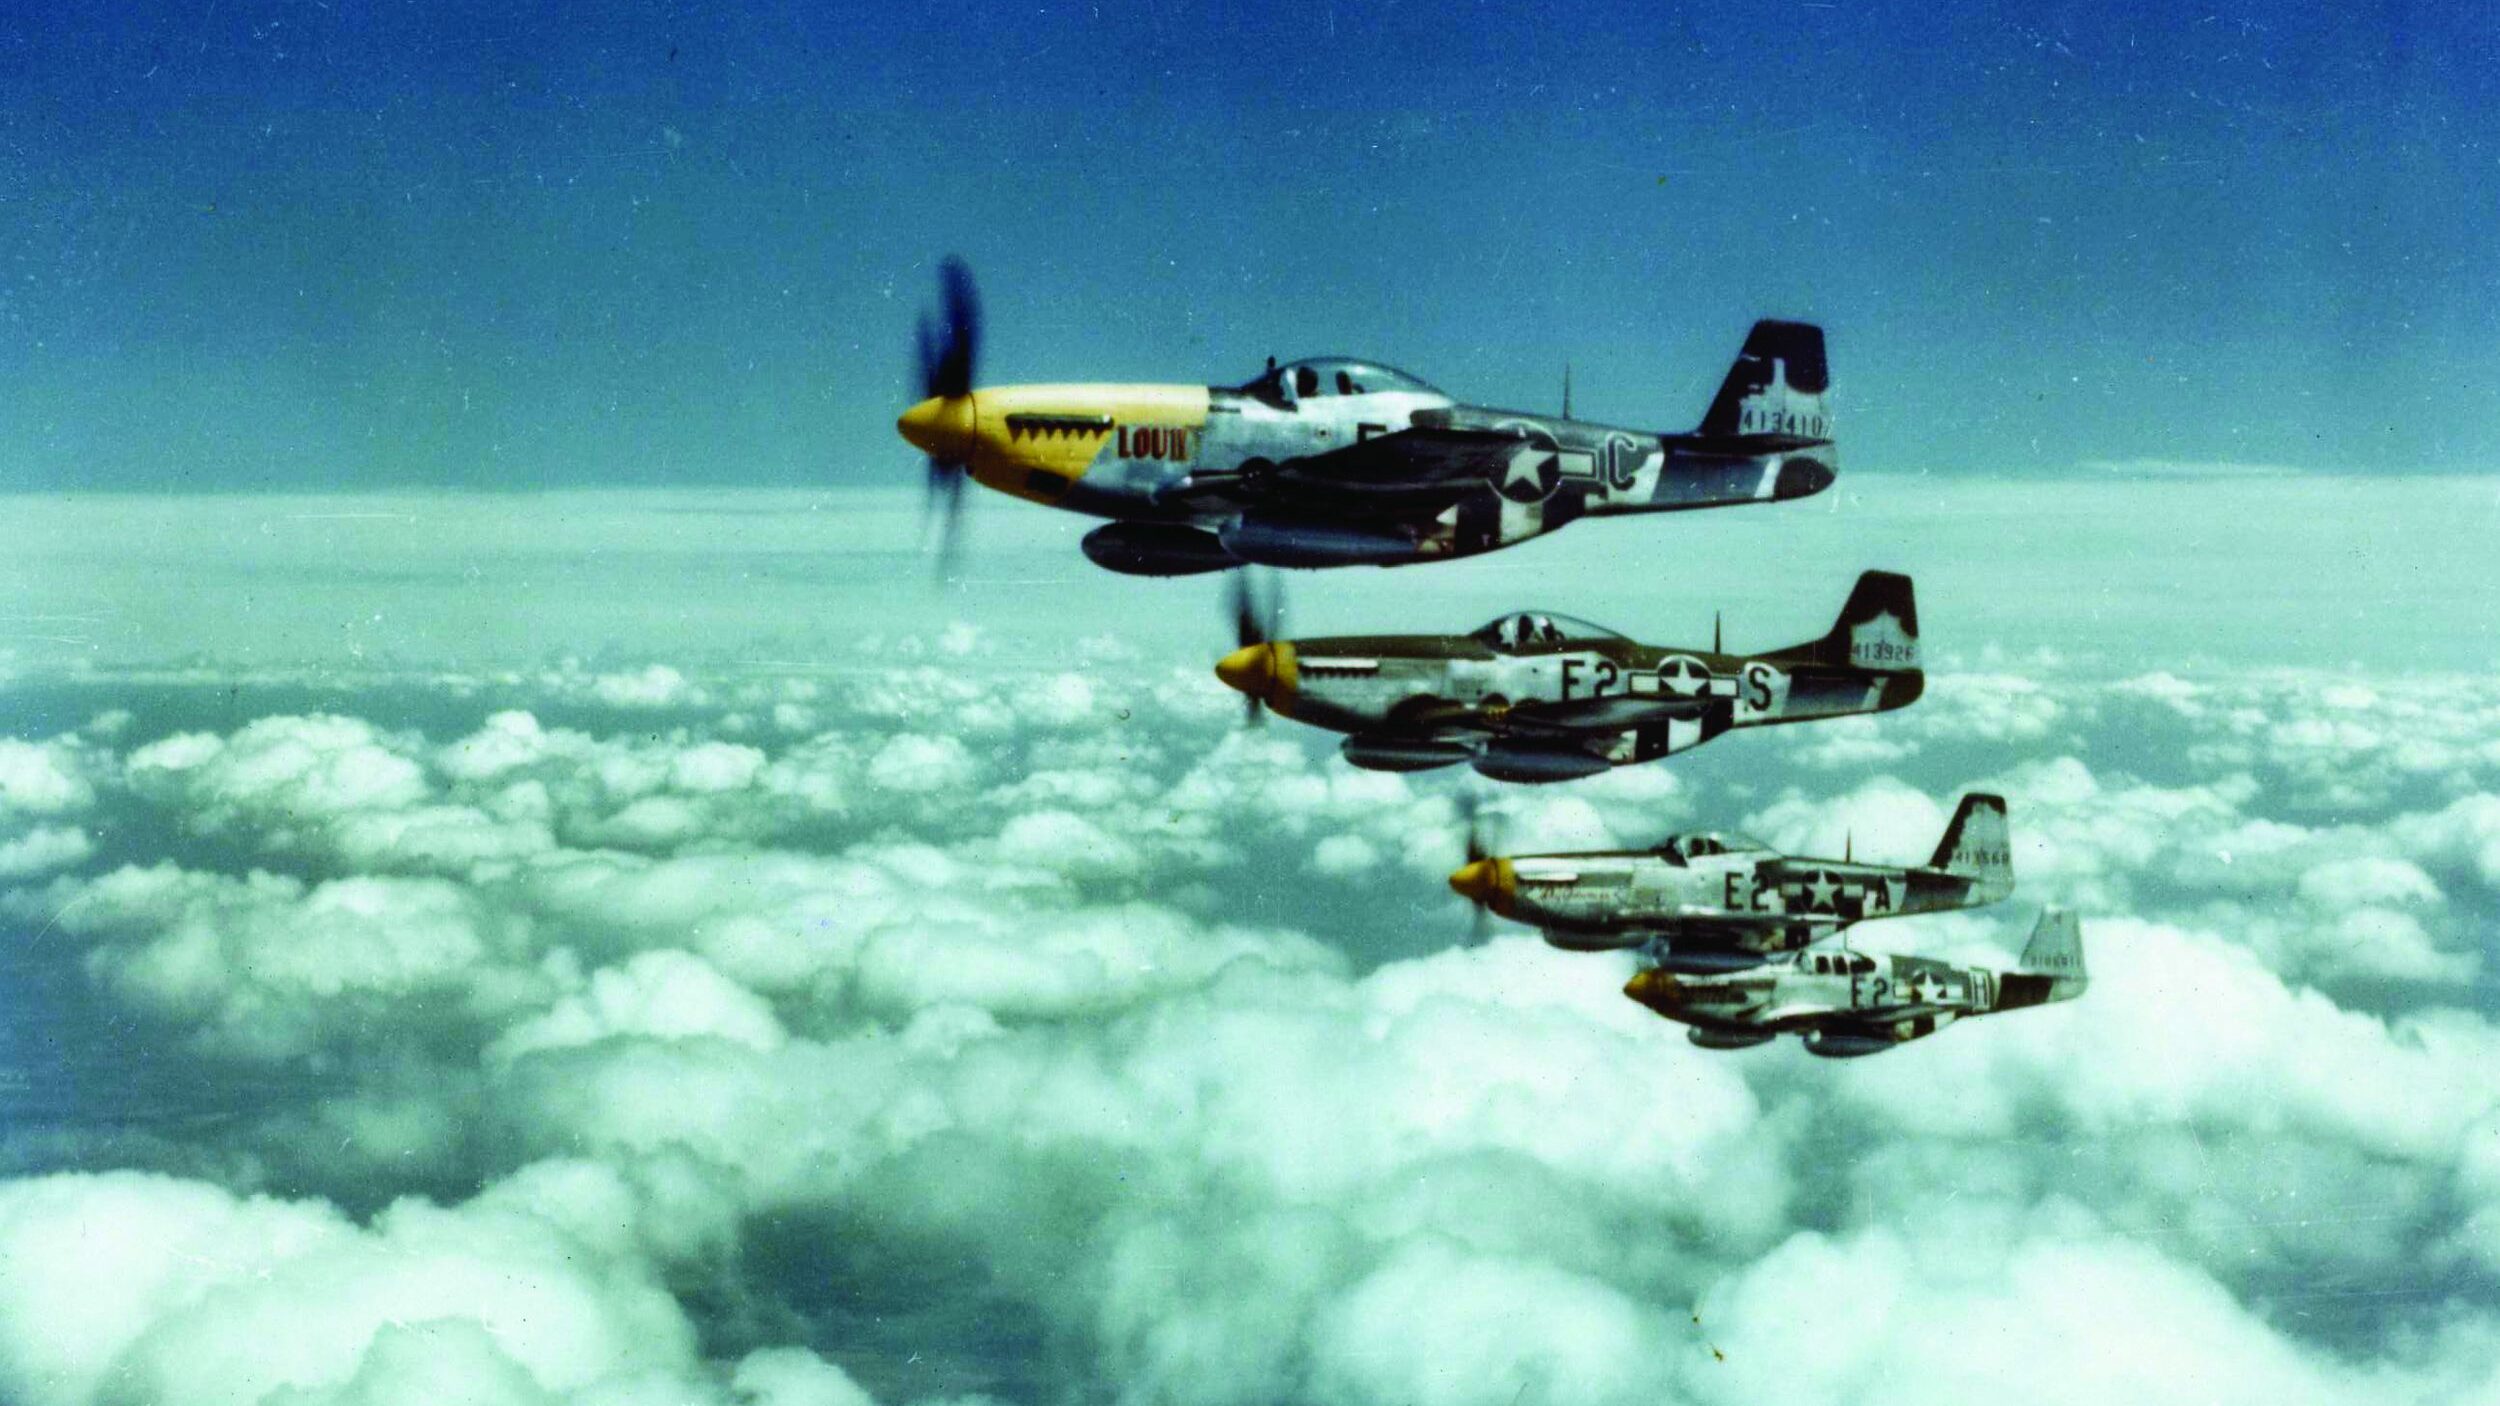 A flight of famed North American P-51 Mustang fighters flies in tight formation.